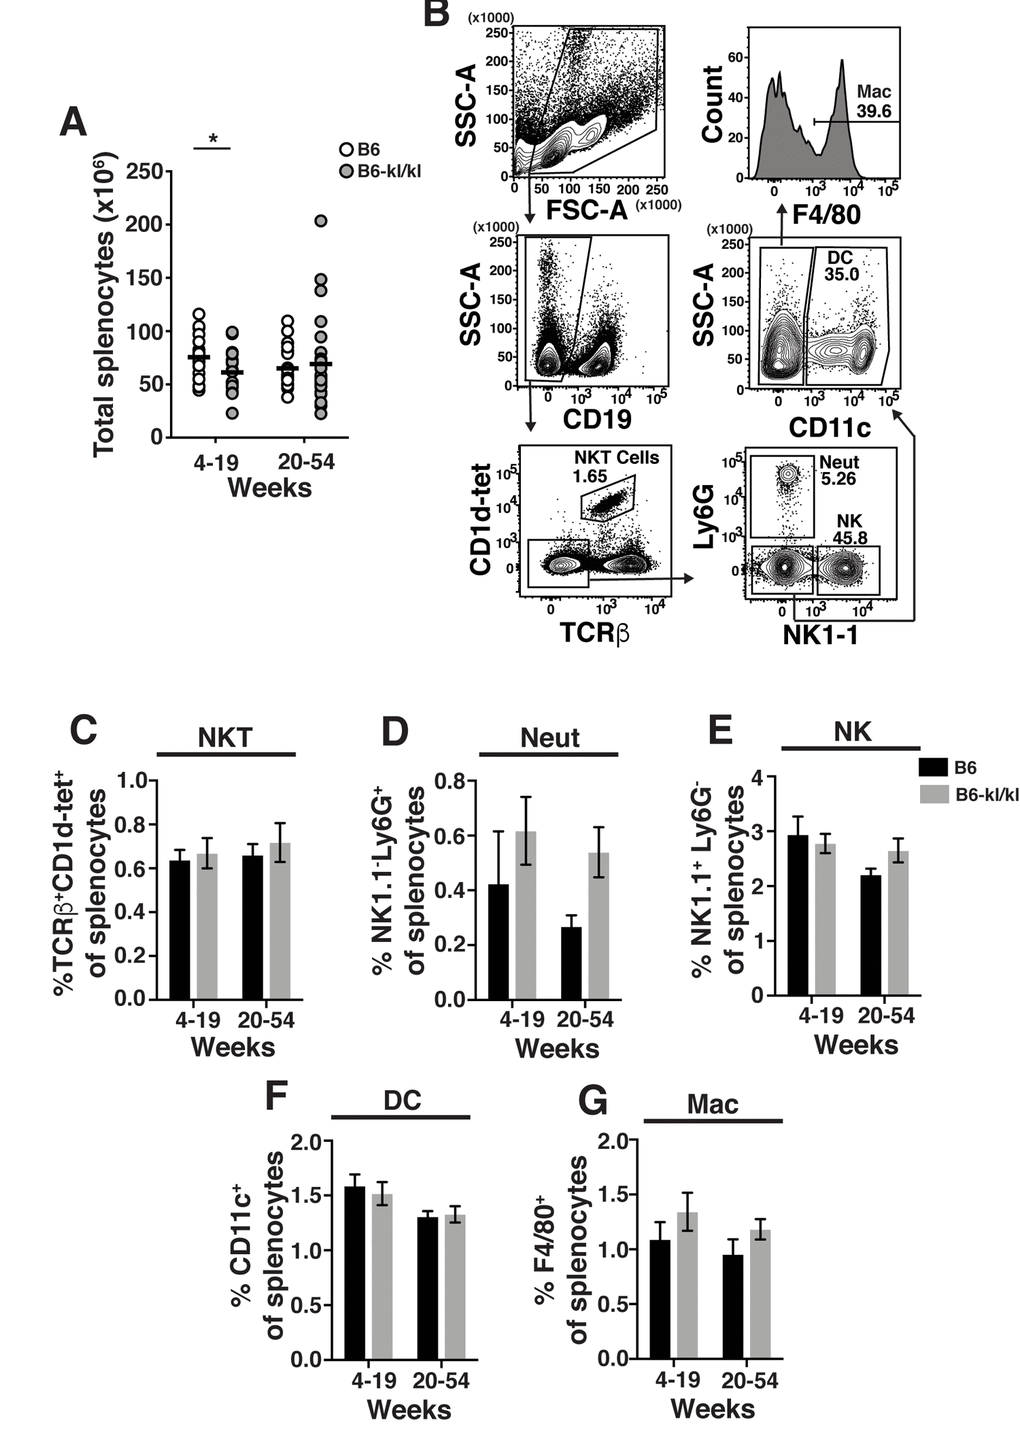 Innate immune cell composition in the spleen is similar in C57BL/6 and B6-kl/kl mice. (A) Total splenocytes in C57BL/6 and B6-kl/kl mice at 4-19 weeks (C57BL/6 n=25 and B6-kl/kl n=19) and 20+ weeks (C57BL/6 n=25 and B6-kl/kl n=27) of age from pooled male and female mice. Statistical significance determined by multiple t tests: * p ≤ 0.05. (B) Representative flow cytometry plots of NKT cells (CD19-CD1d+TCRβ+), Neutrophils (Neut) (CD19-CD1d-TCRβ--NK1.1-Ly6G+), NK cells (CD19-CD1d-TCRβ-NK1.1+Ly6G-), dendritic cells (DC) (CD19-CD1d-TCRβ-NK1.1-Ly6G-CD11c+), and macrophages (Mac) (CD19-CD1d-TCRβ-NK1.1-Ly6G-CD11c-F4/80+). Frequency of (C) NKT, (D) neutrophils, (E) NK cells, (F) dendritic cells, and (G) macrophages. C57BL/6 n=13, 4-19 weeks; n=19, 20+ weeks. B6-kl/kl n=11, 4-19 weeks; n=16, 20+ weeks. Bars represent the standard error mean.